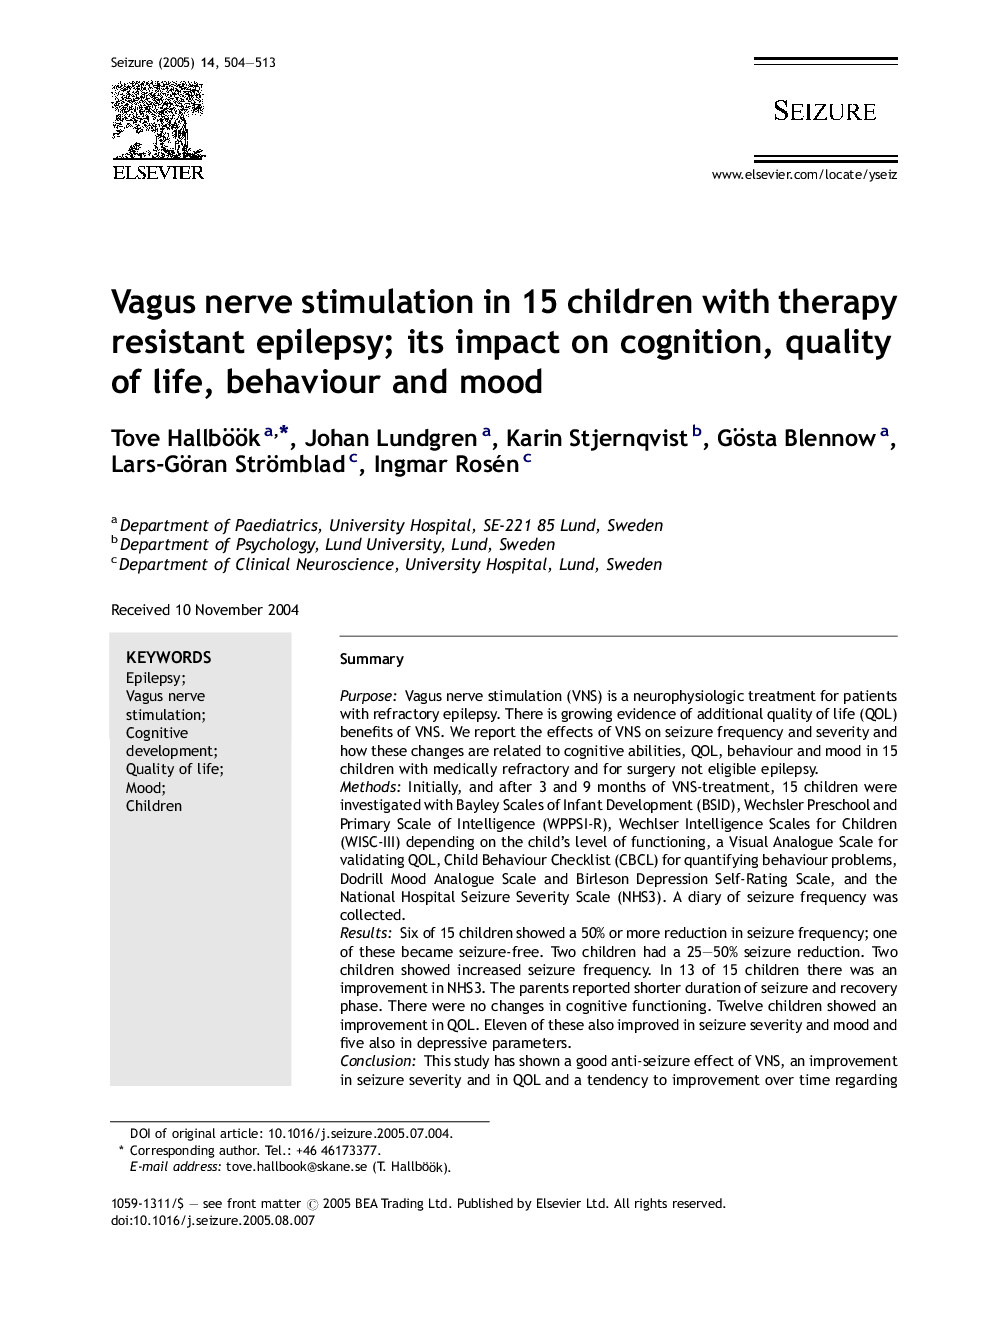 Vagus nerve stimulation in 15 children with therapy resistant epilepsy; its impact on cognition, quality of life, behaviour and mood